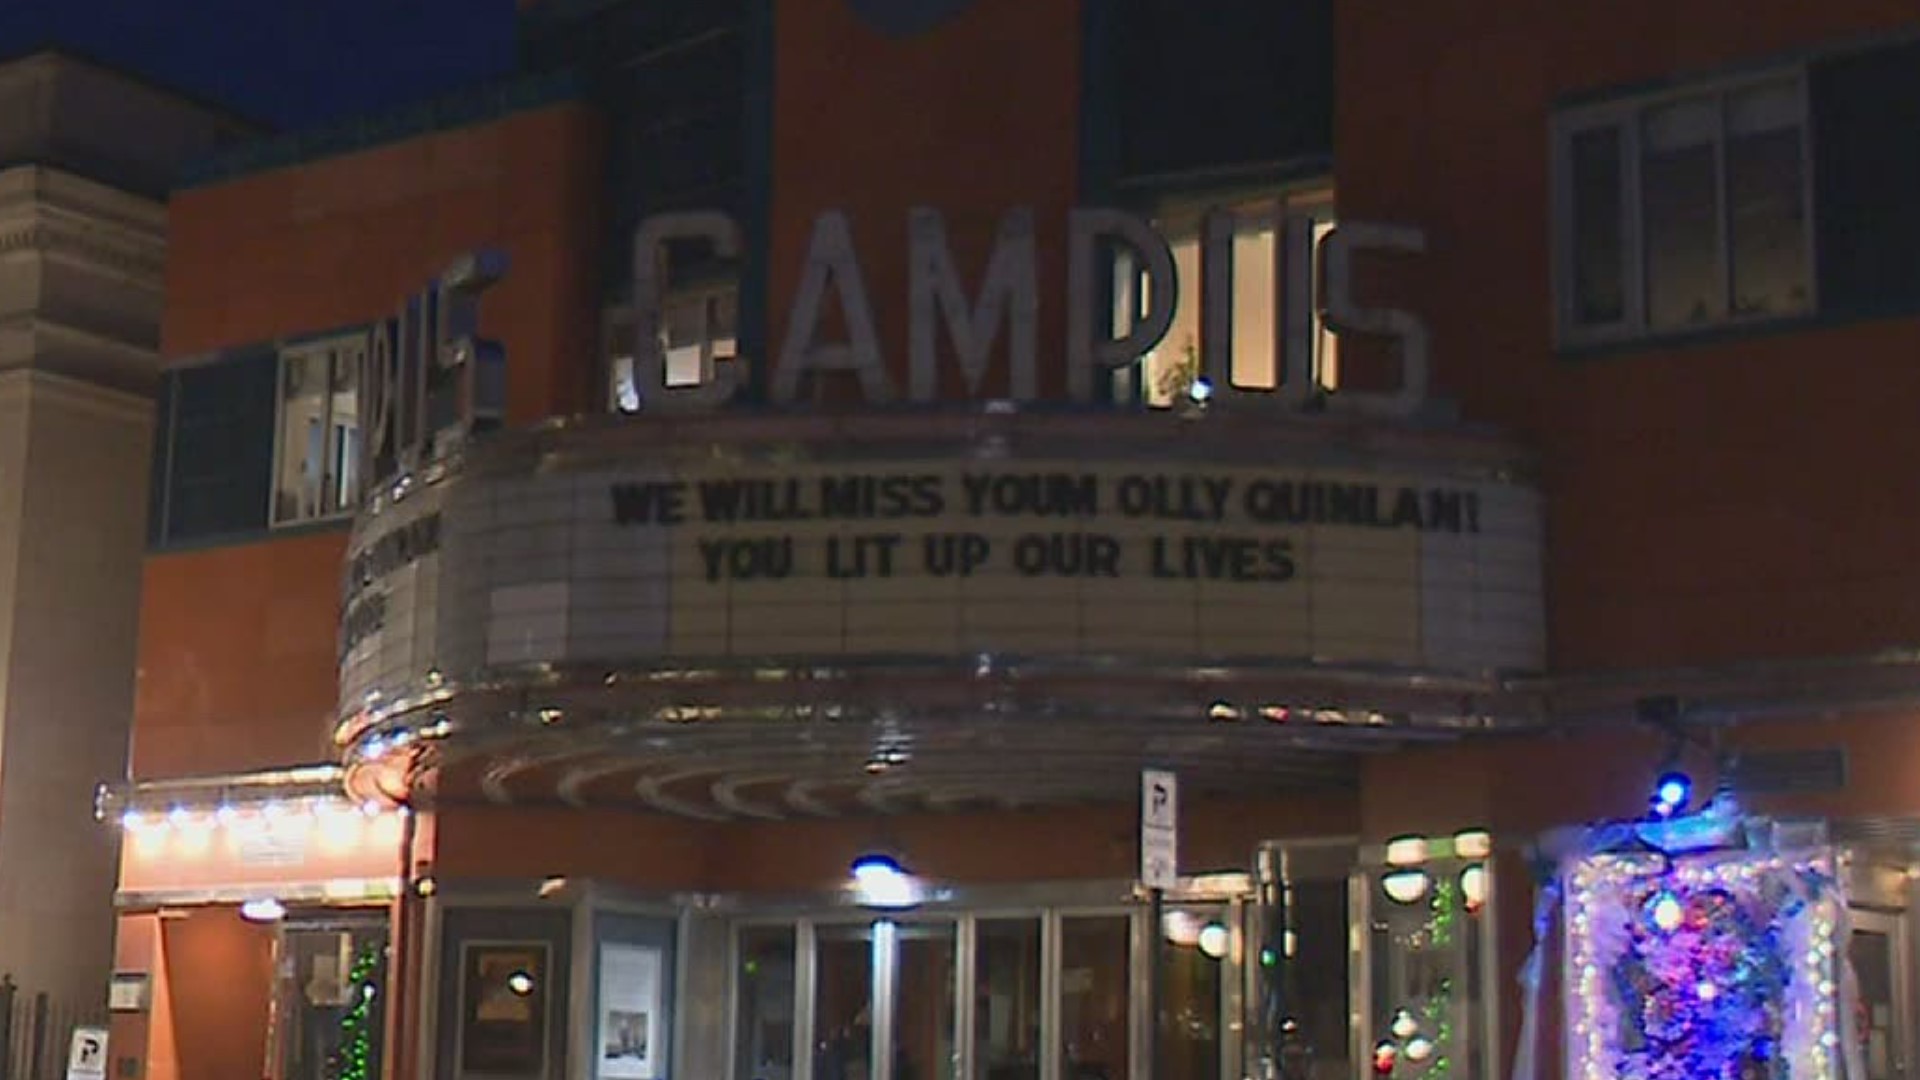 Just two weeks after reopening, the Campus Theatre in Lewisburg has closed again because of the coronavirus.